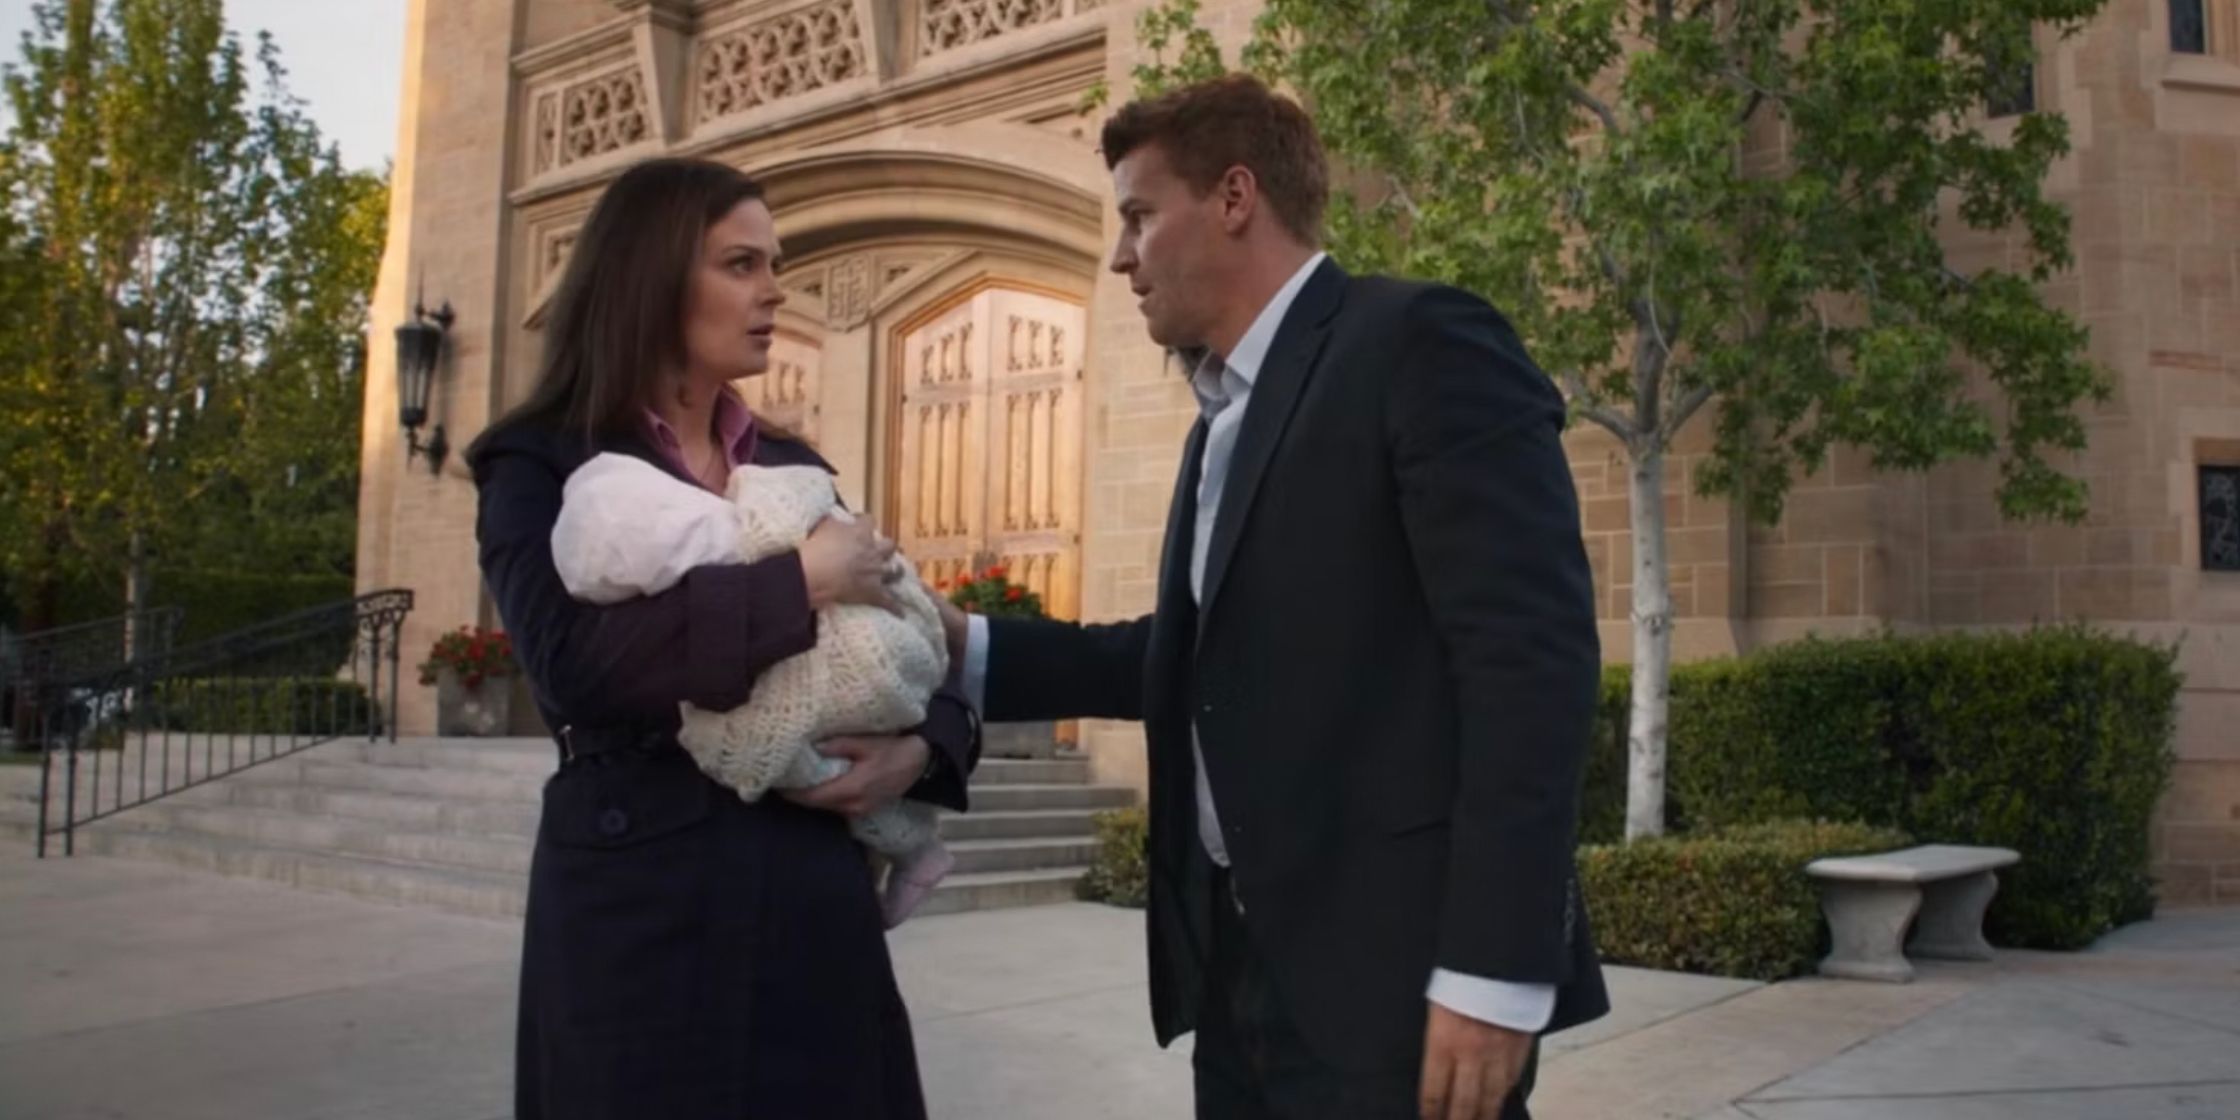 Brennan and Booth with baby Christine outside of a church in Bones